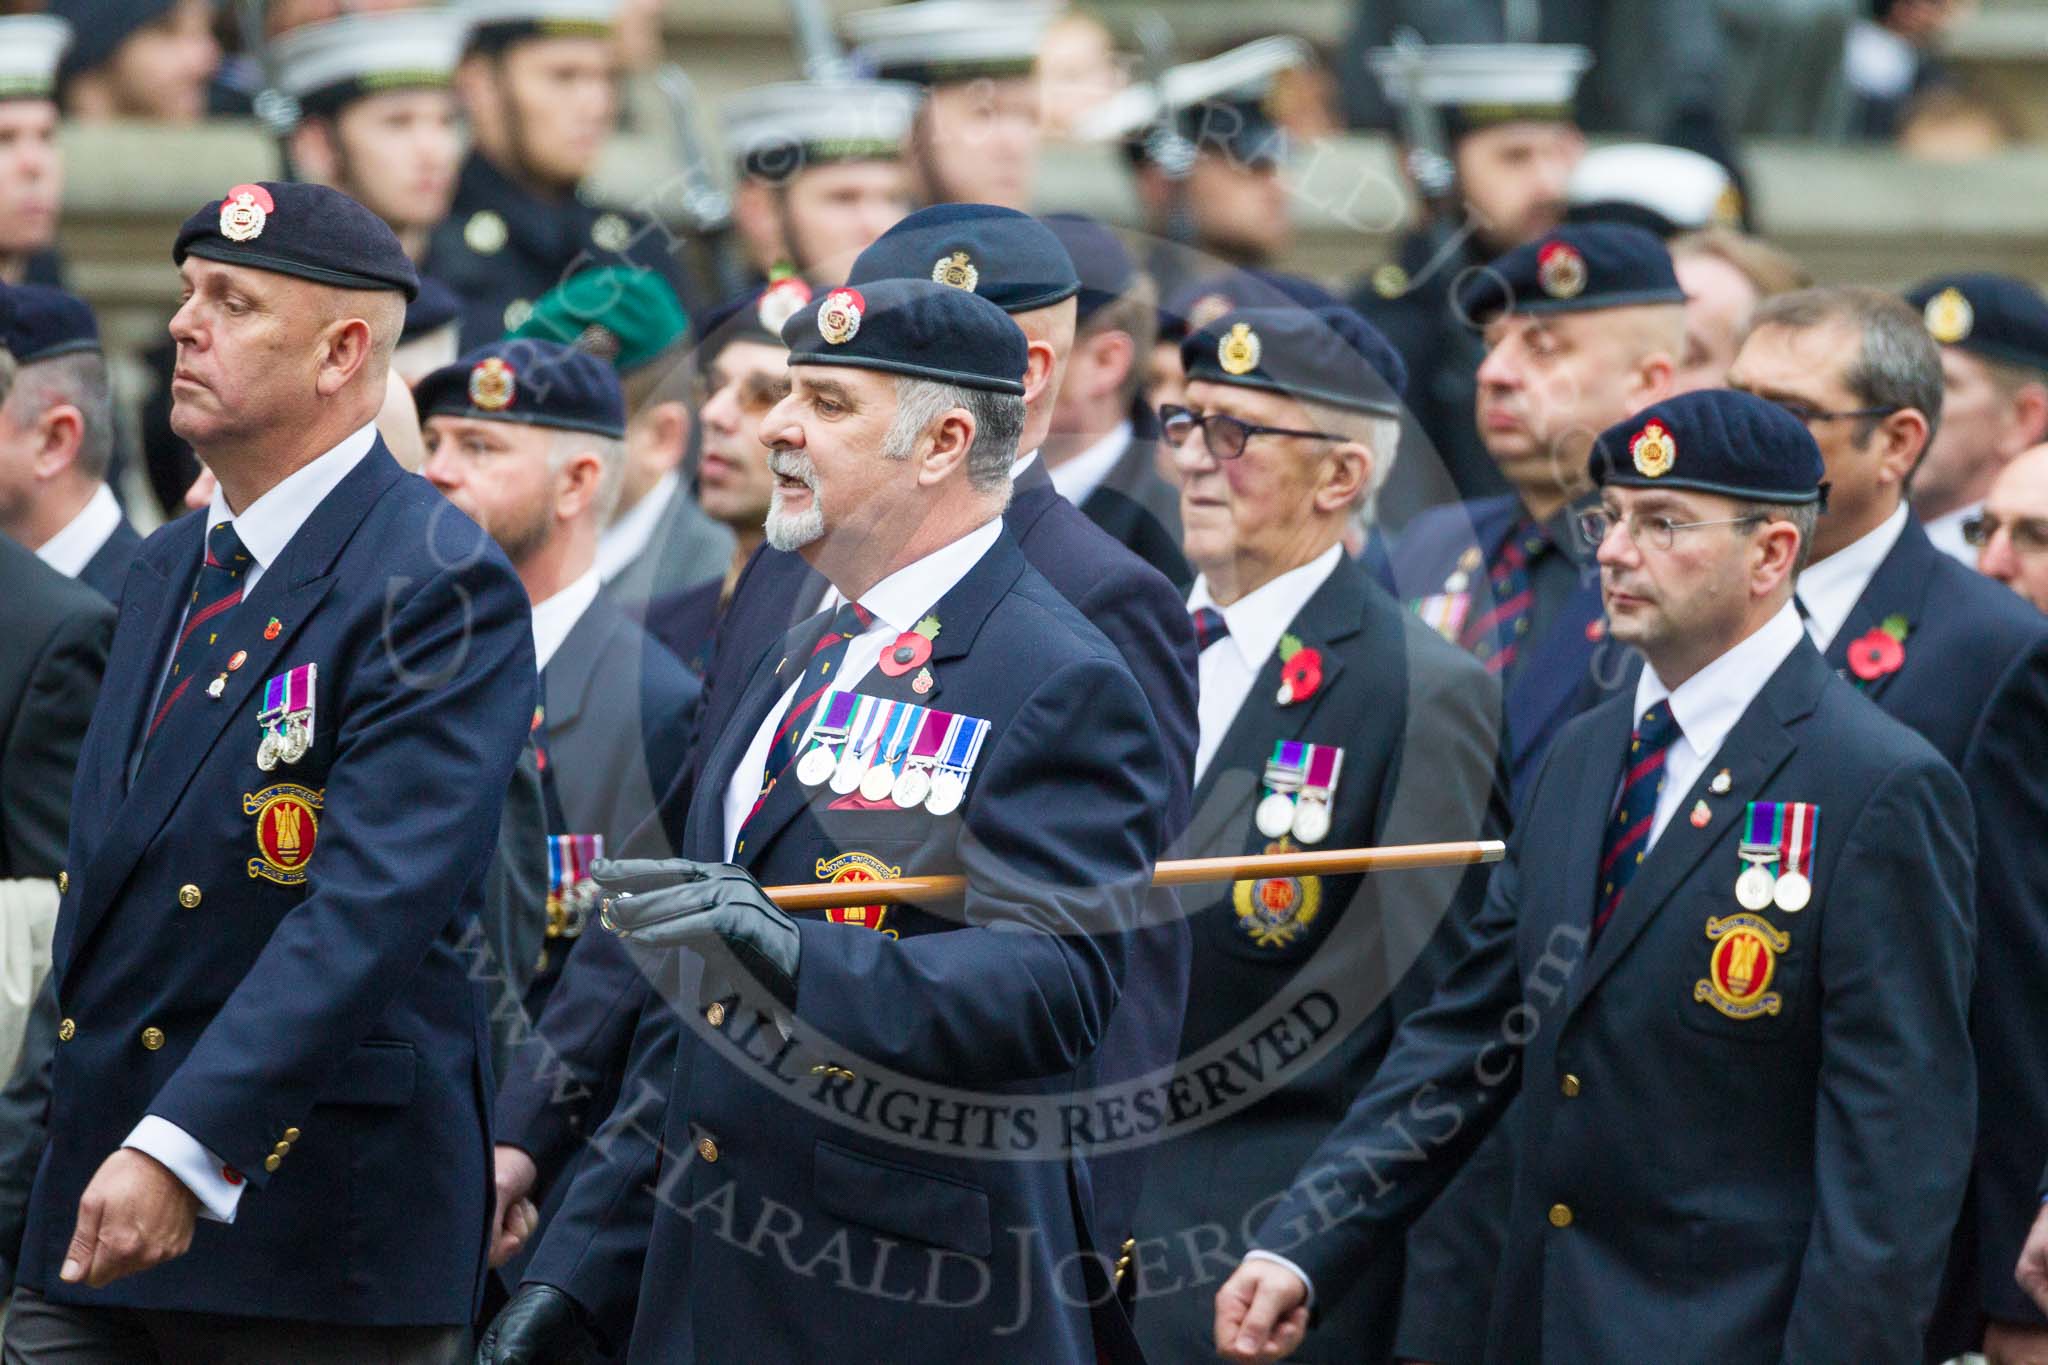 Remembrance Sunday at the Cenotaph 2015: Group B6, Royal Engineers Bomb Disposal Association (Anniversary).
Cenotaph, Whitehall, London SW1,
London,
Greater London,
United Kingdom,
on 08 November 2015 at 11:37, image #49